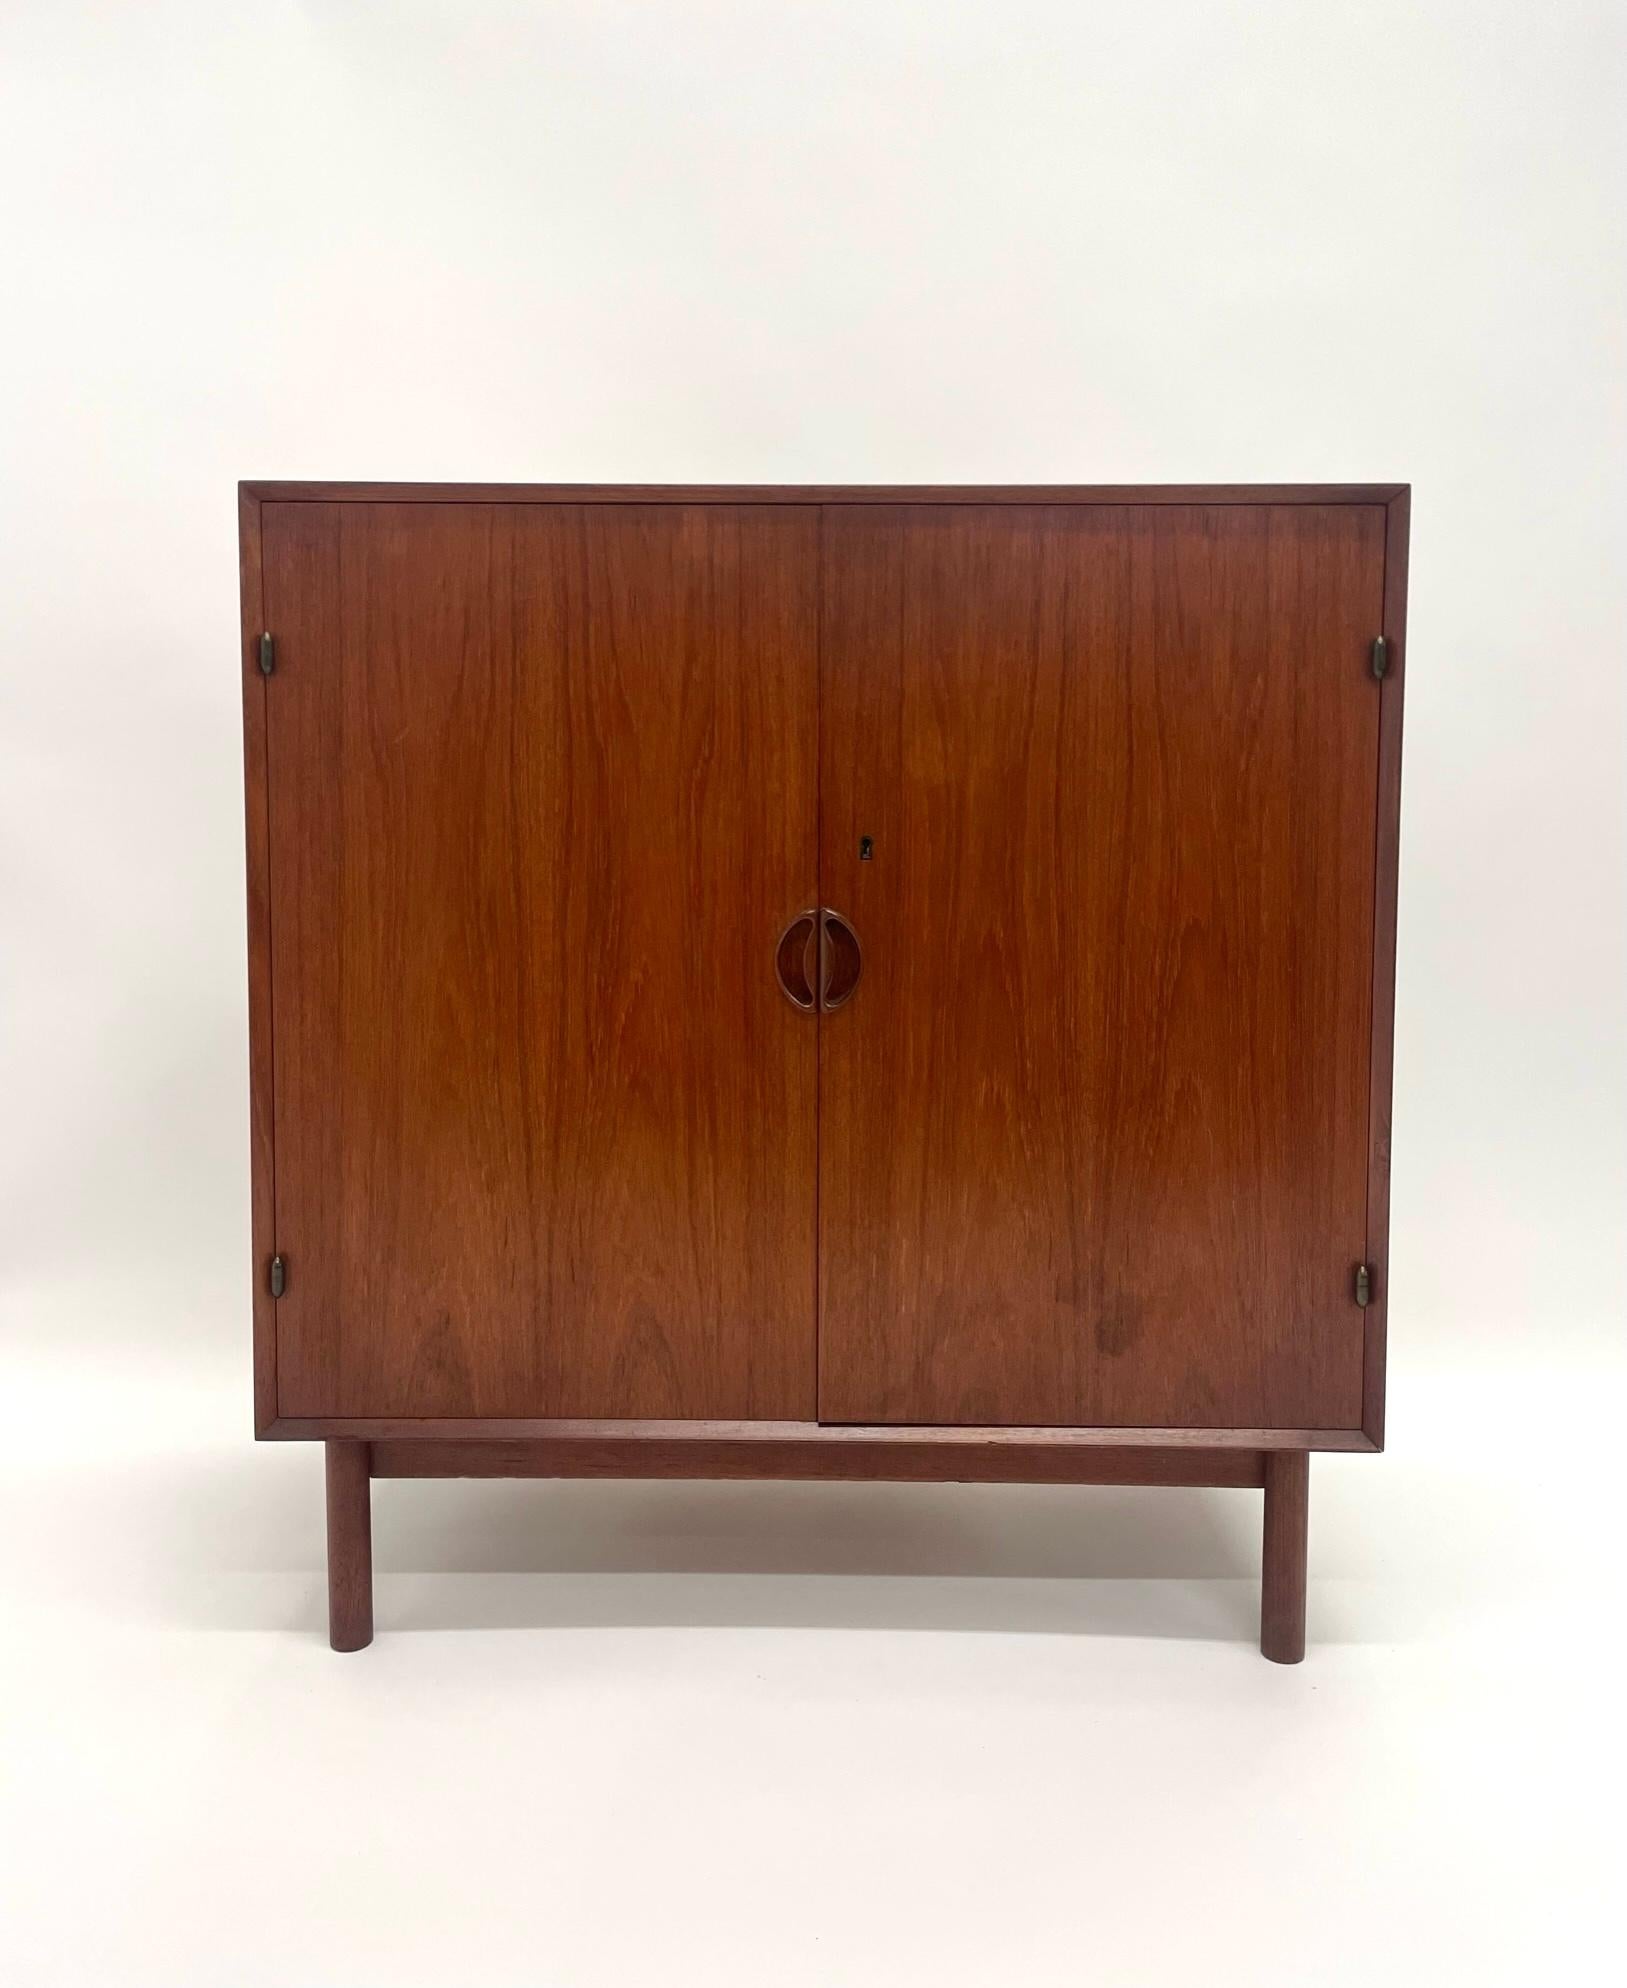 Peter Hvidt and Orla Molgaard-Nielsen solid teak cabinet. This two door cabinet opens to three sliding shelves, single lower shelf. Made of solid teak with dovetail joints on all sides. This cabinet shows off danish craftsmanship at its best.